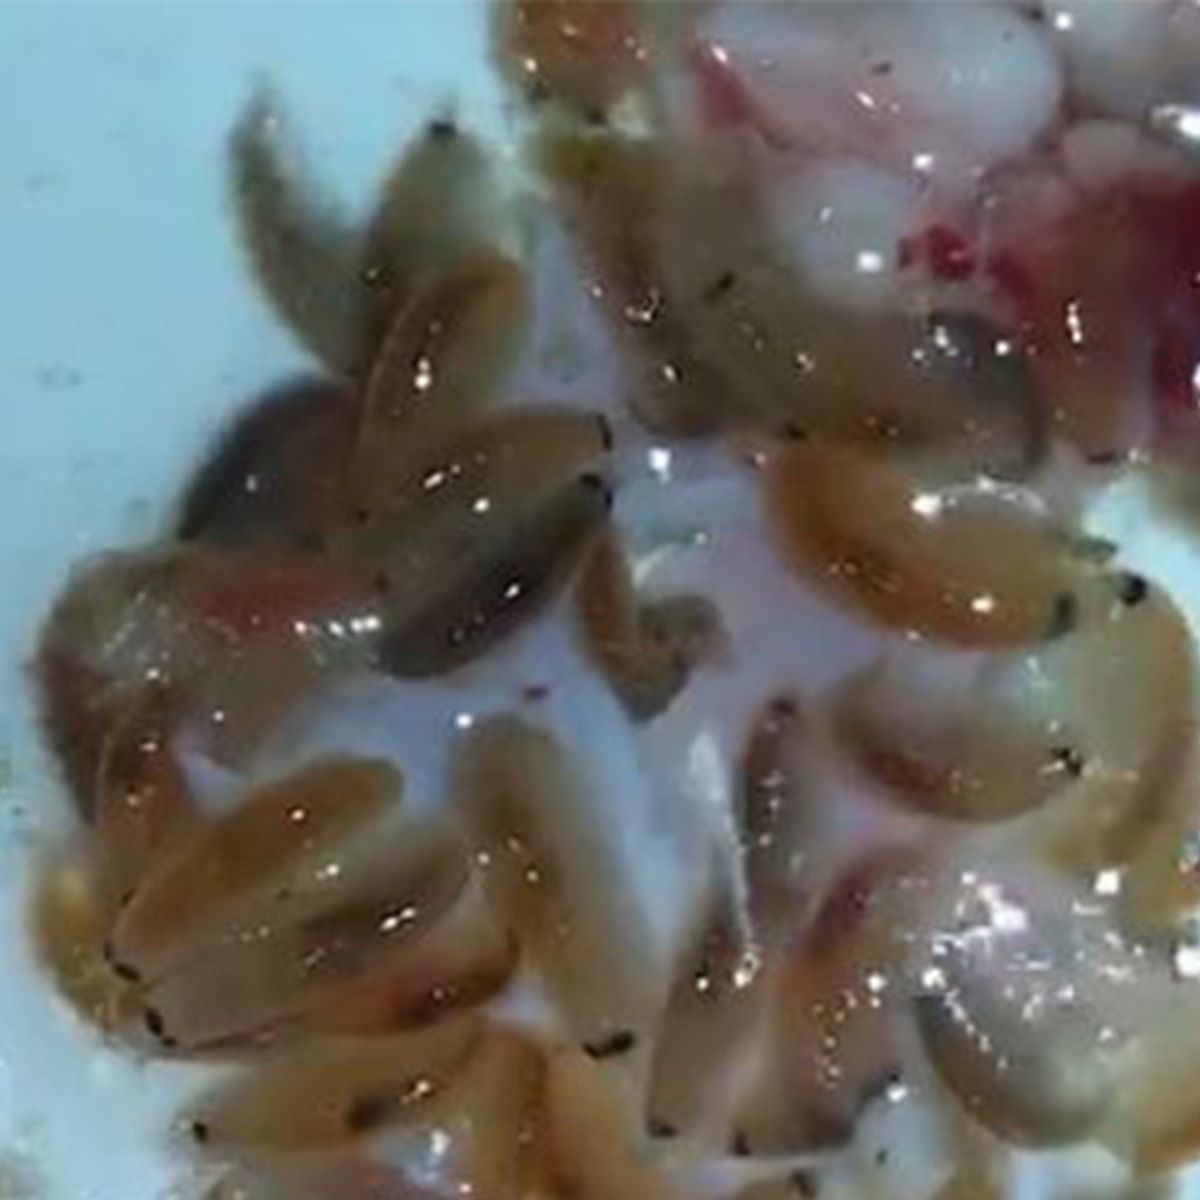 Did an Australian Teen Get Attacked by Flesh-Eating Sea Bugs